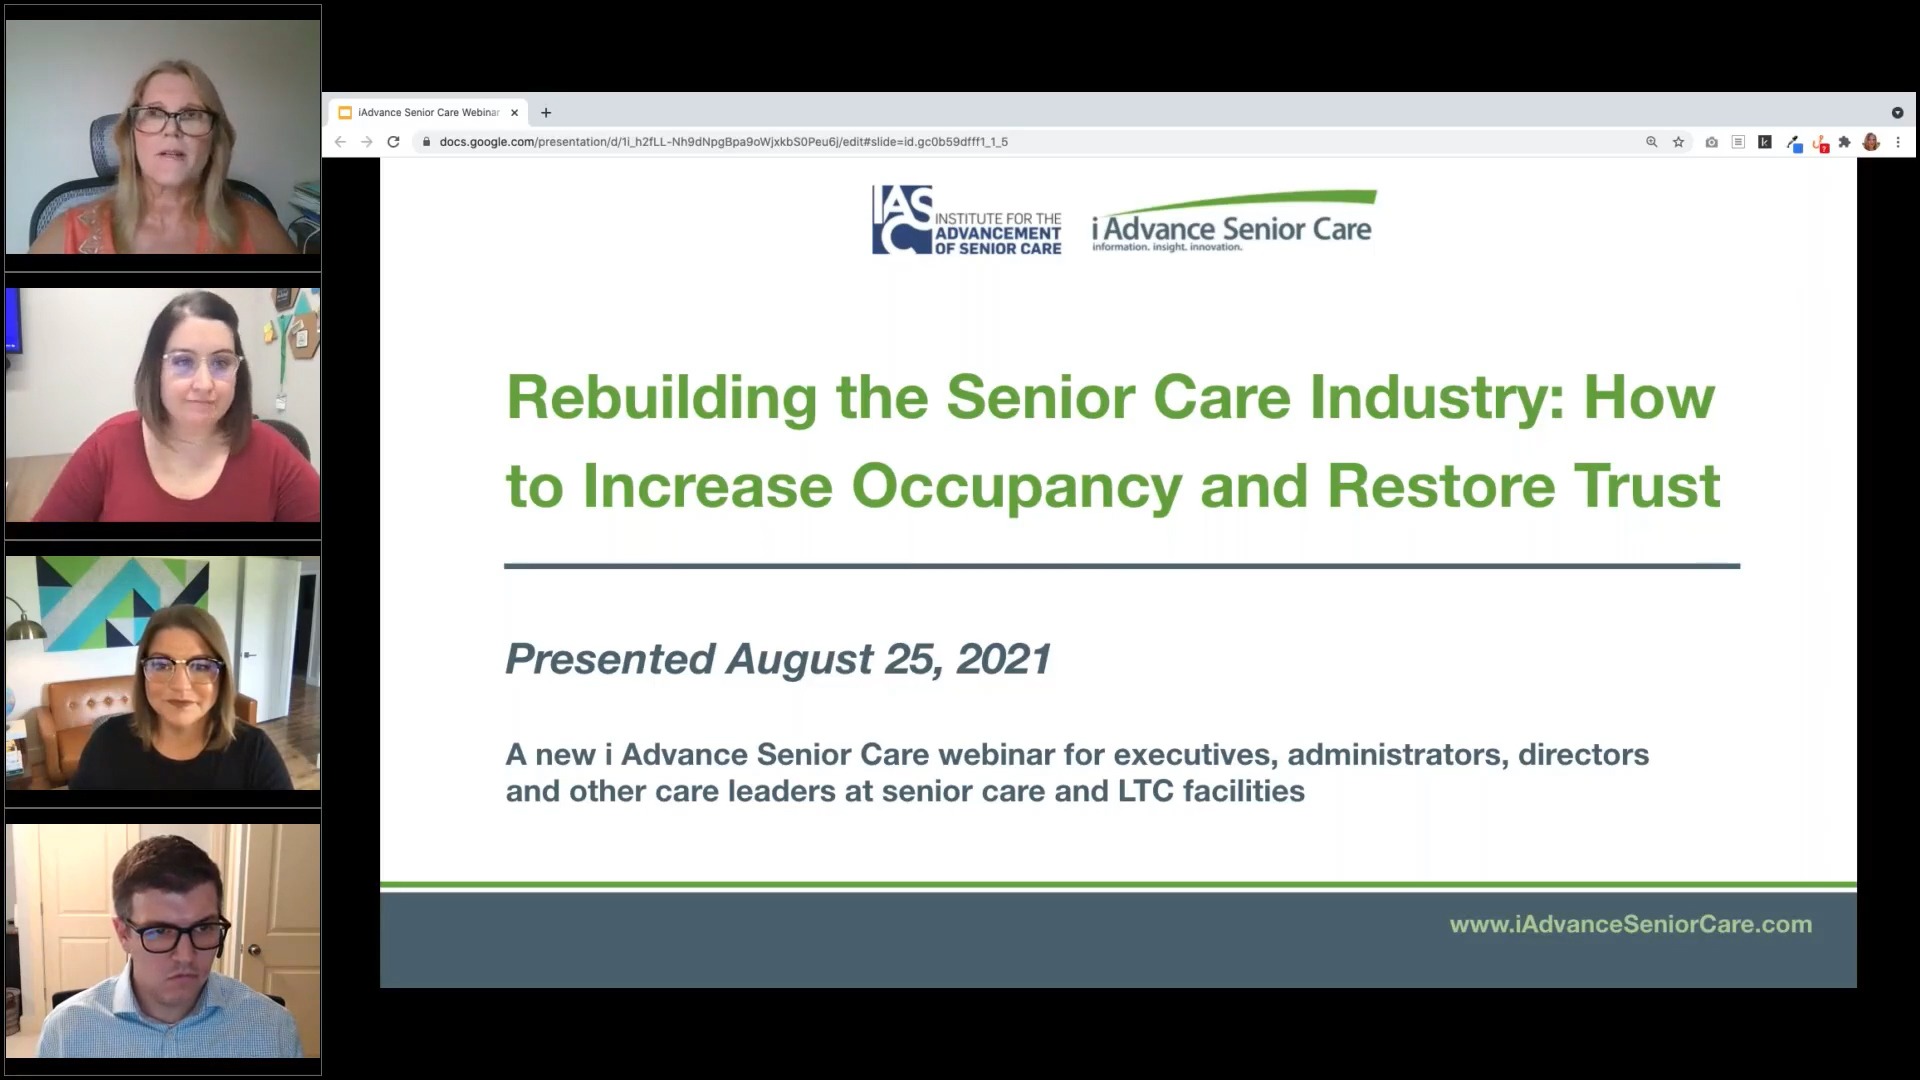  Rebuilding the Senior Care Industry: How to Increase Occupancy and Restore Trust [Webinar]